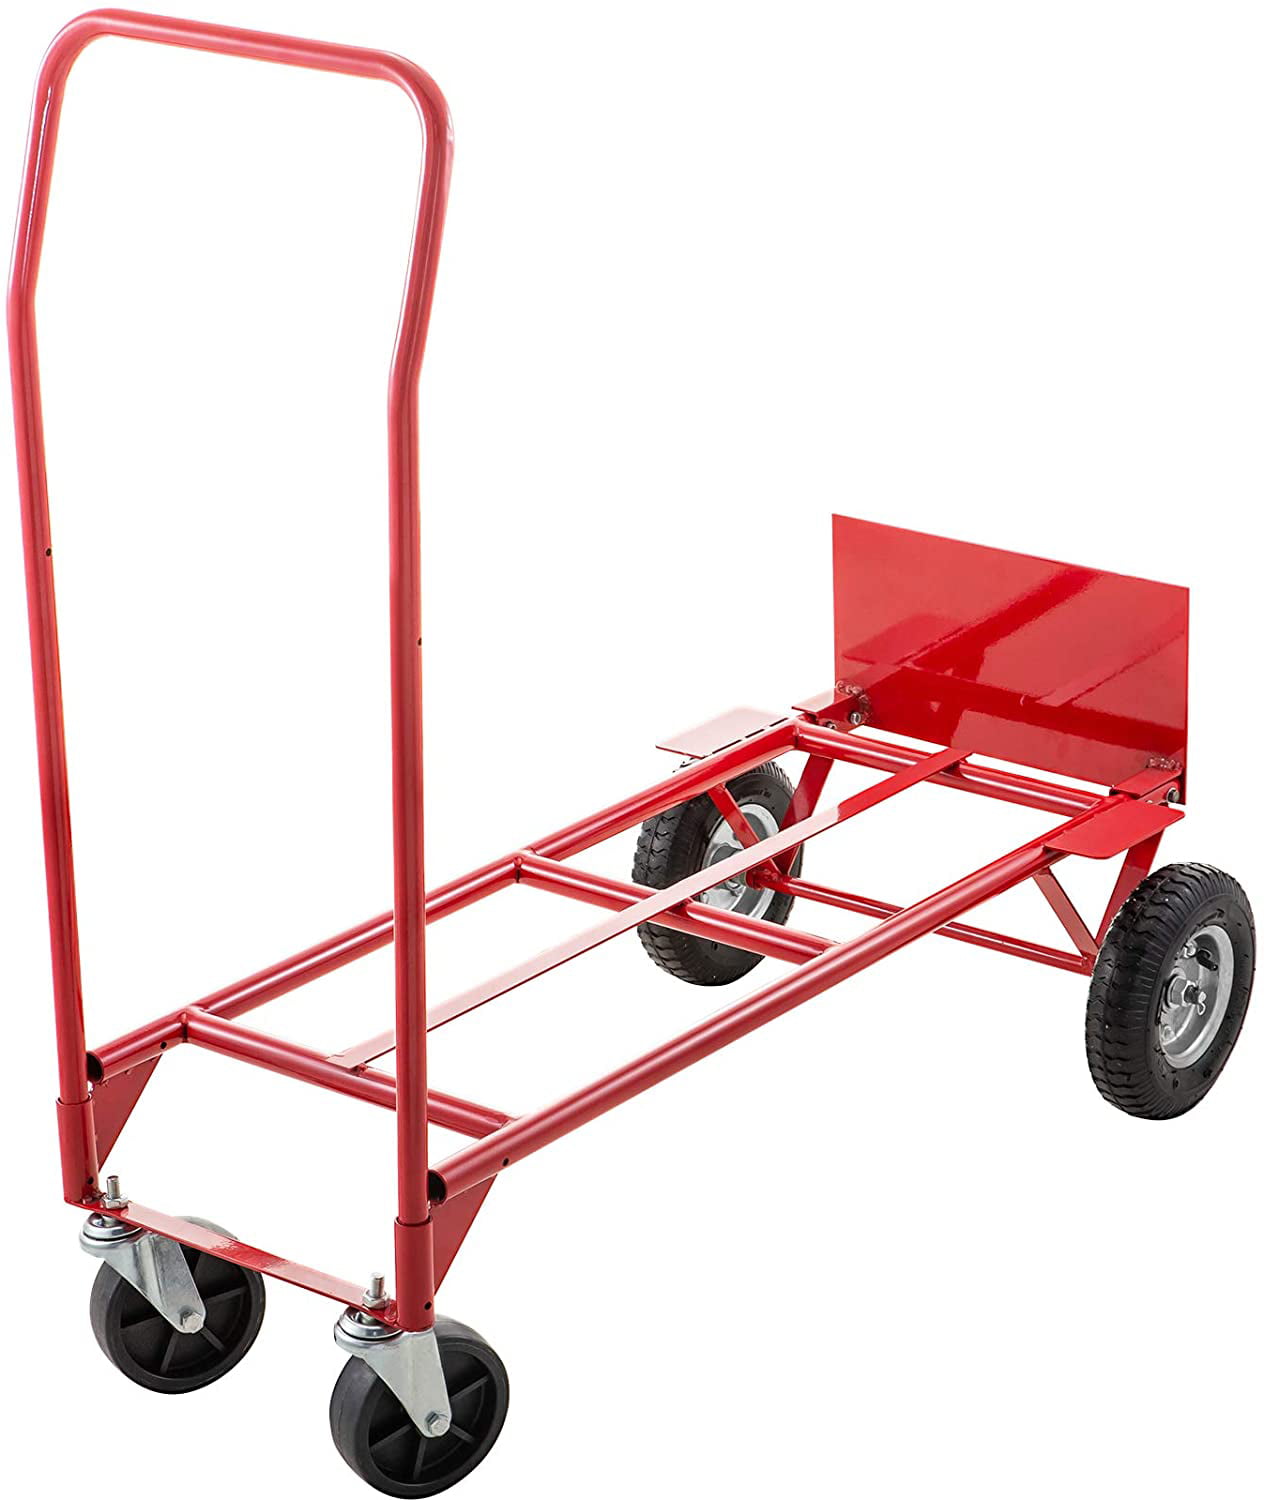 BestEquip Convertible Hand Truck 200lb/300lb Capacity Convertible Dolly with 8 Inch Solid Caster and 5 Inch Swivel Casters Dolly Cart 2 Wheels Dolly and 4 Wheels Cart for Handling Equipment in Red 